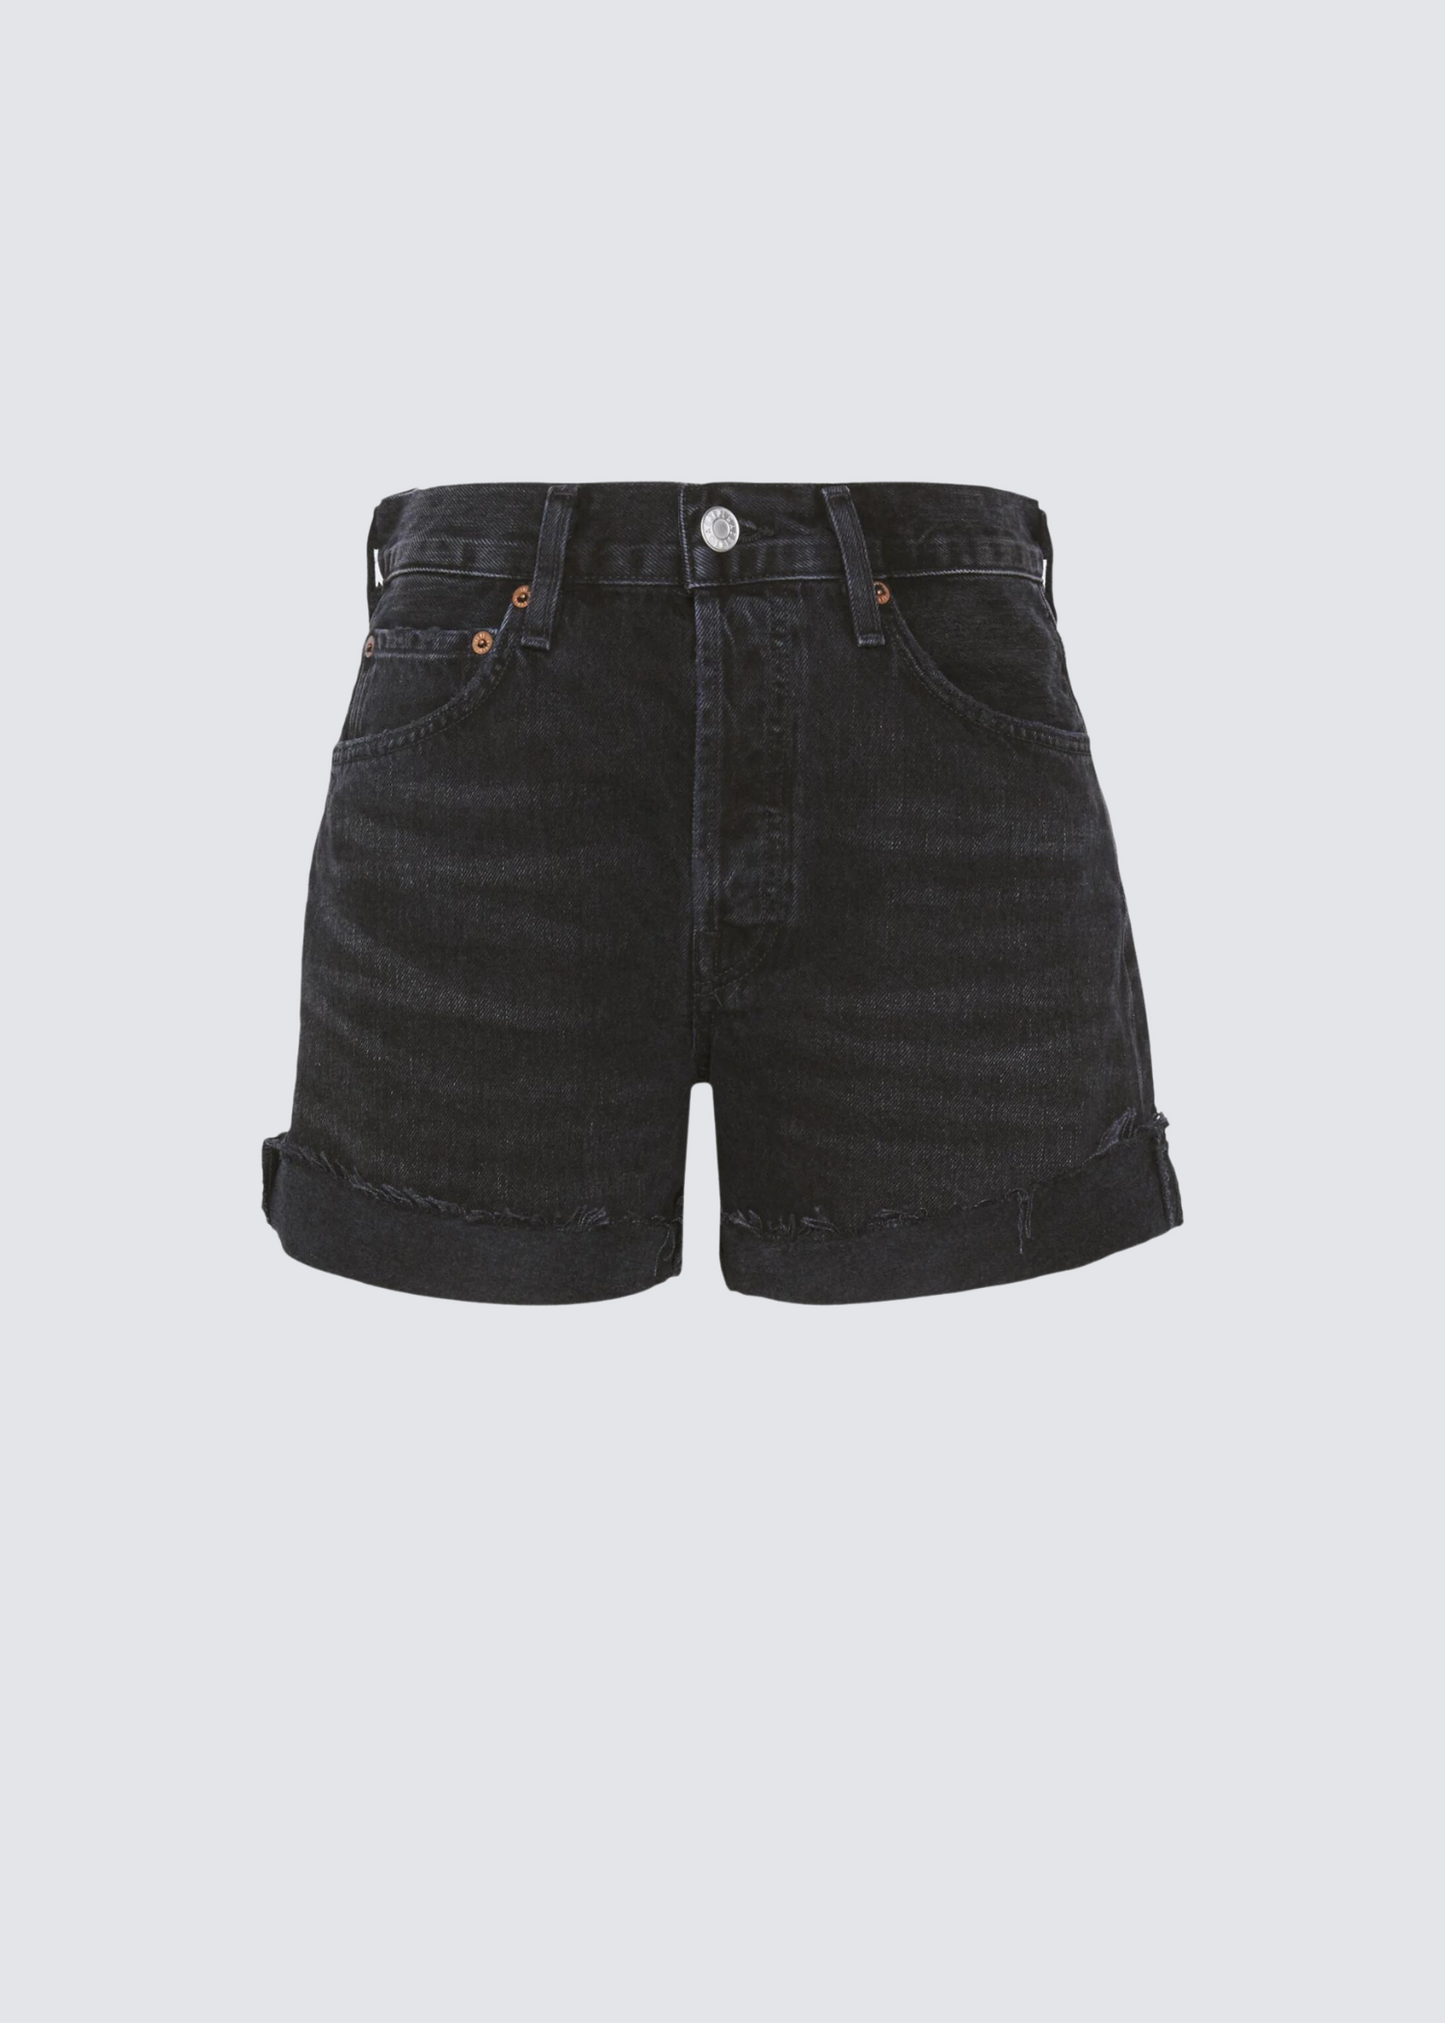 Parker Cuff, Mid Rise Straight, Lucid, Shorts